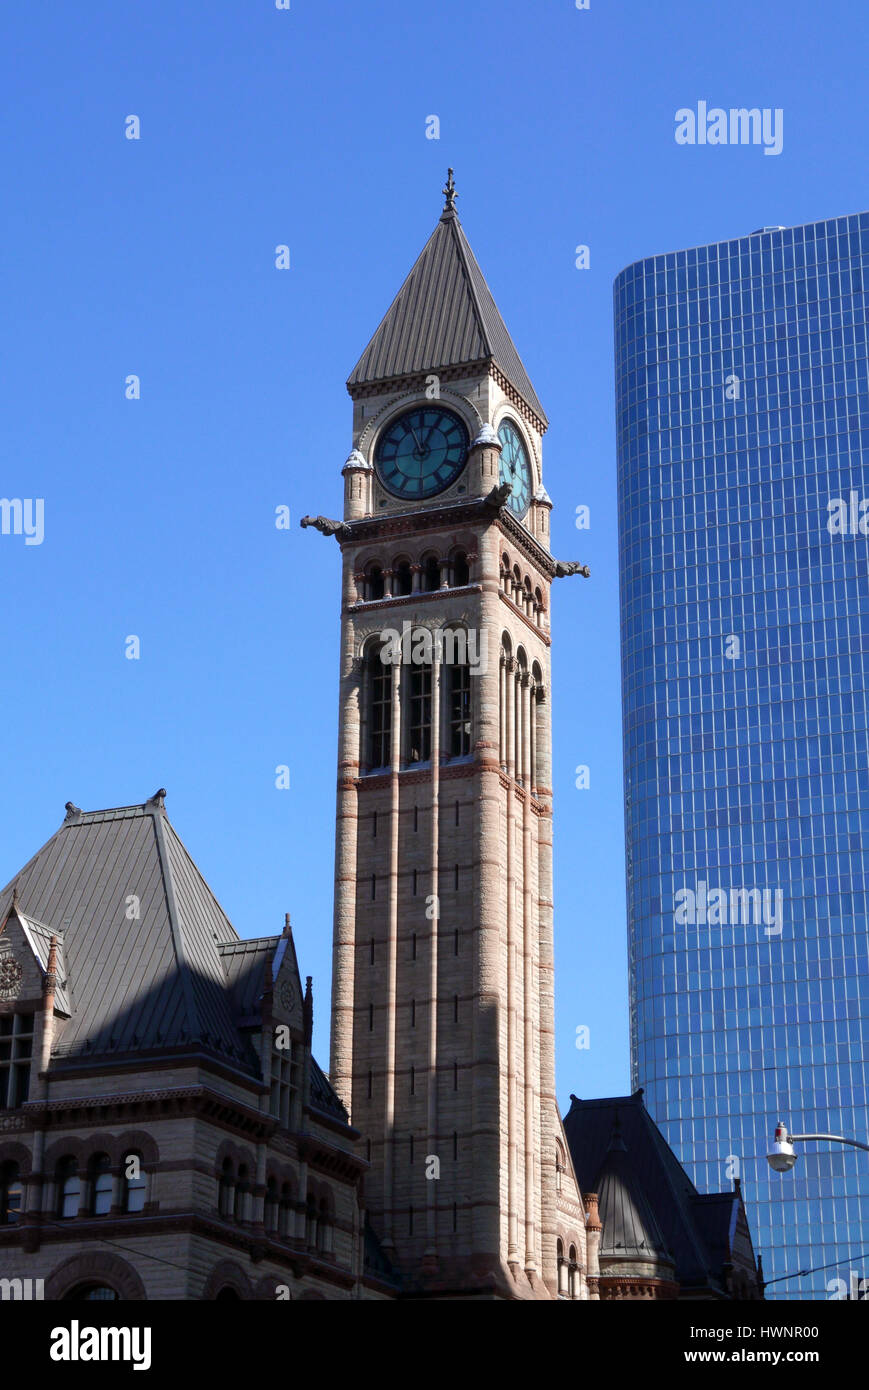 THE CLOCK TOWER OF OLD CITY HALL TORONTO Stock Photo